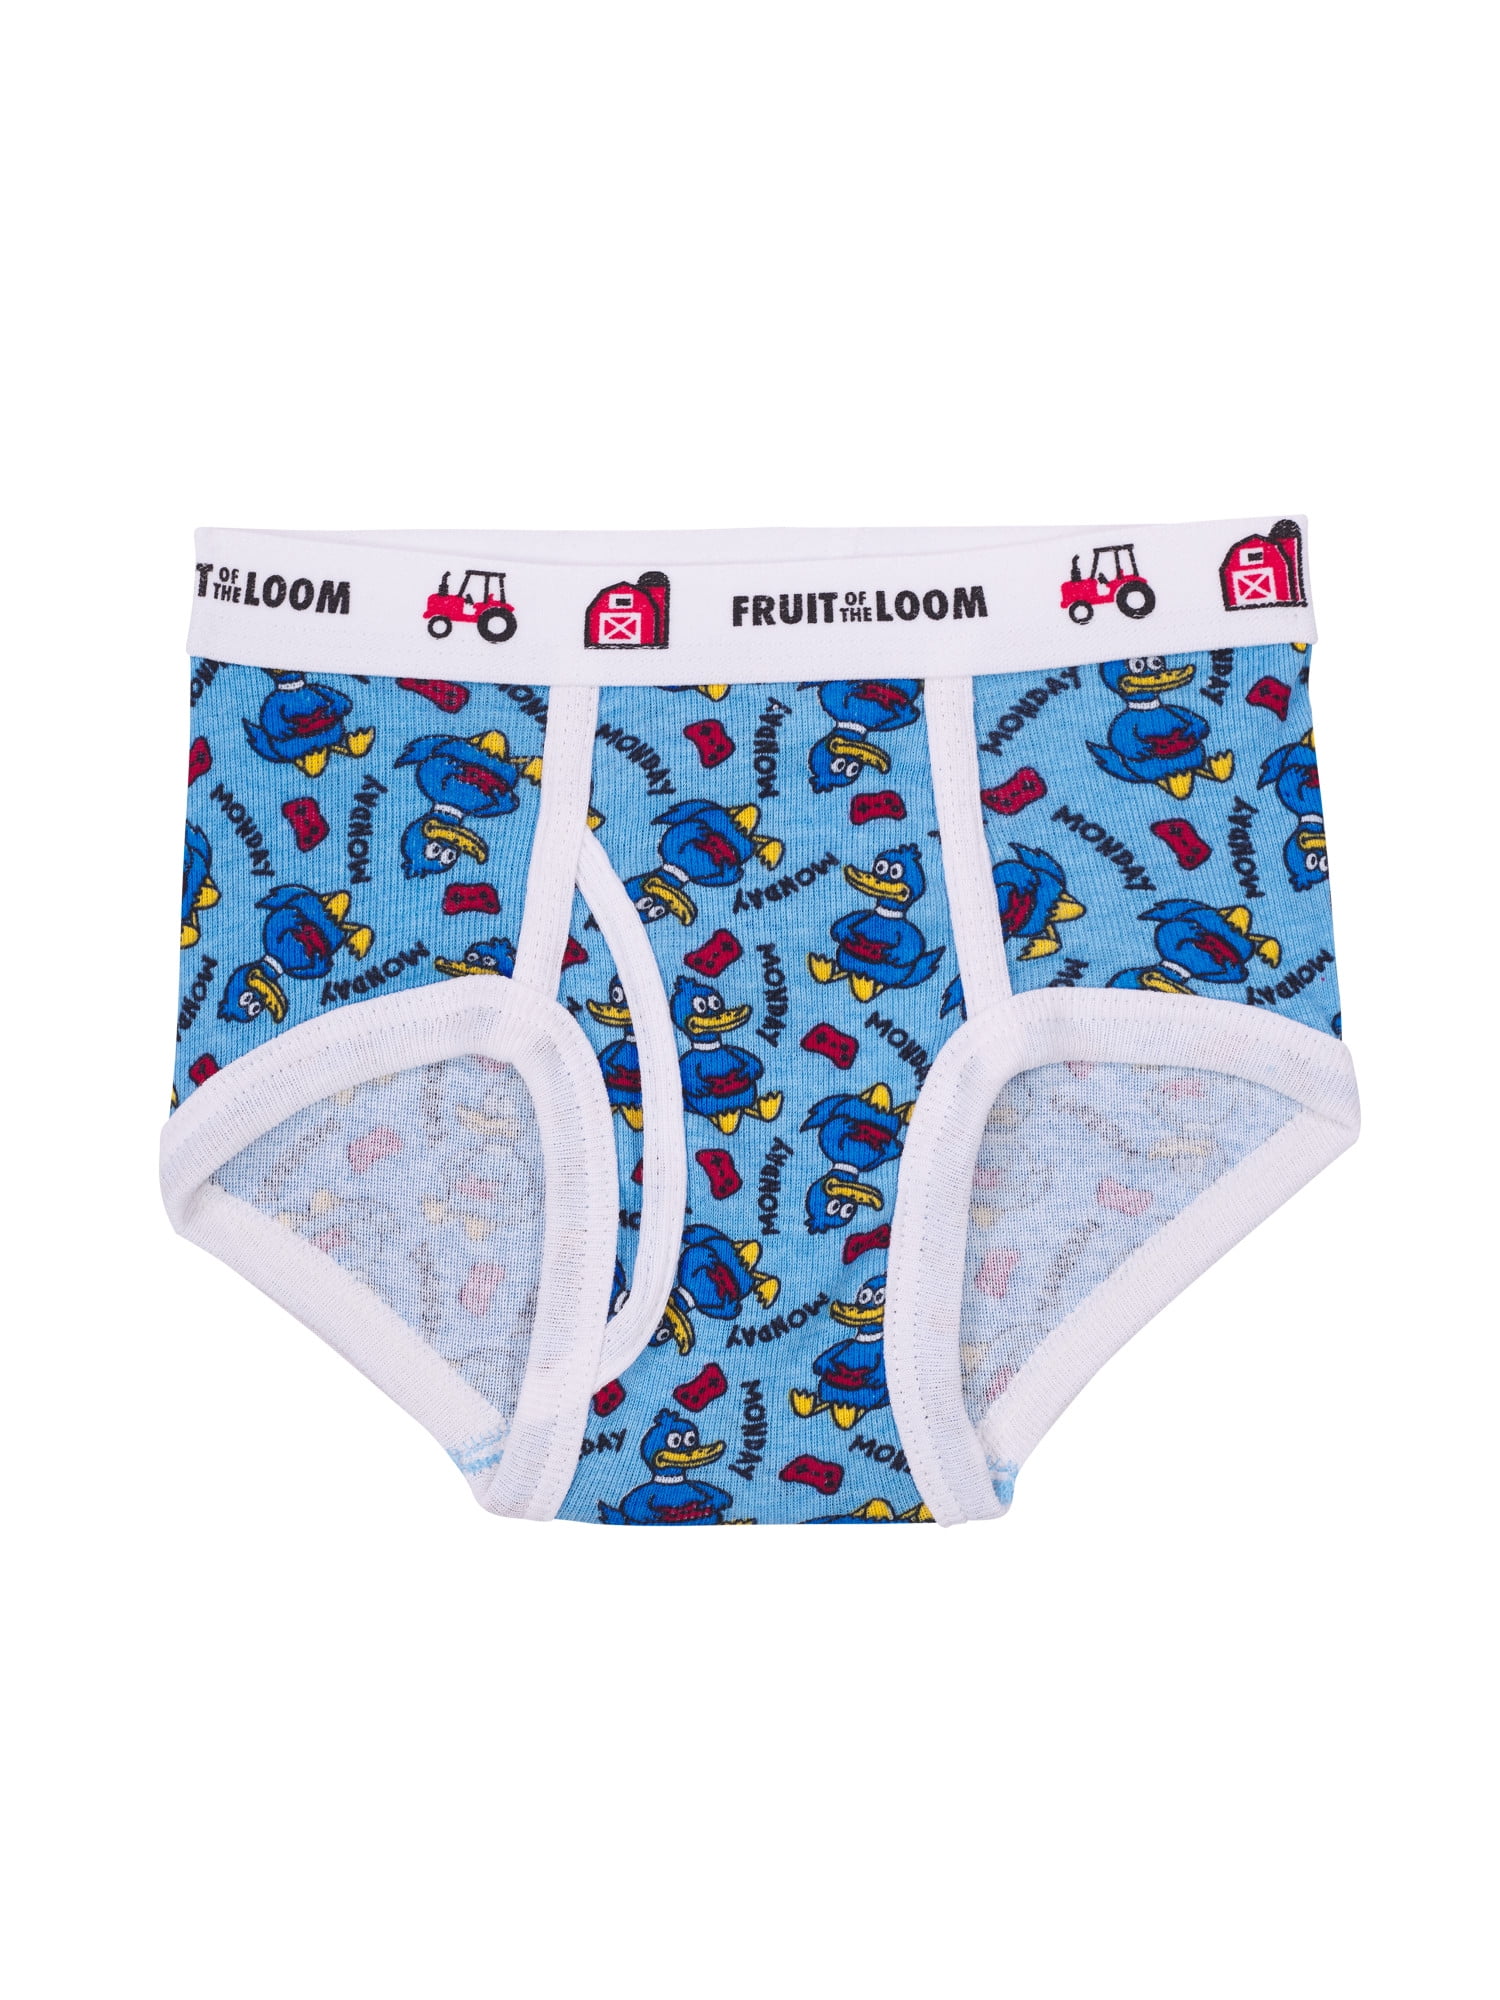 Toddler Boys Days of the Week Briefs Underwear (7 Pair Pack) by Fruit of  the Loom